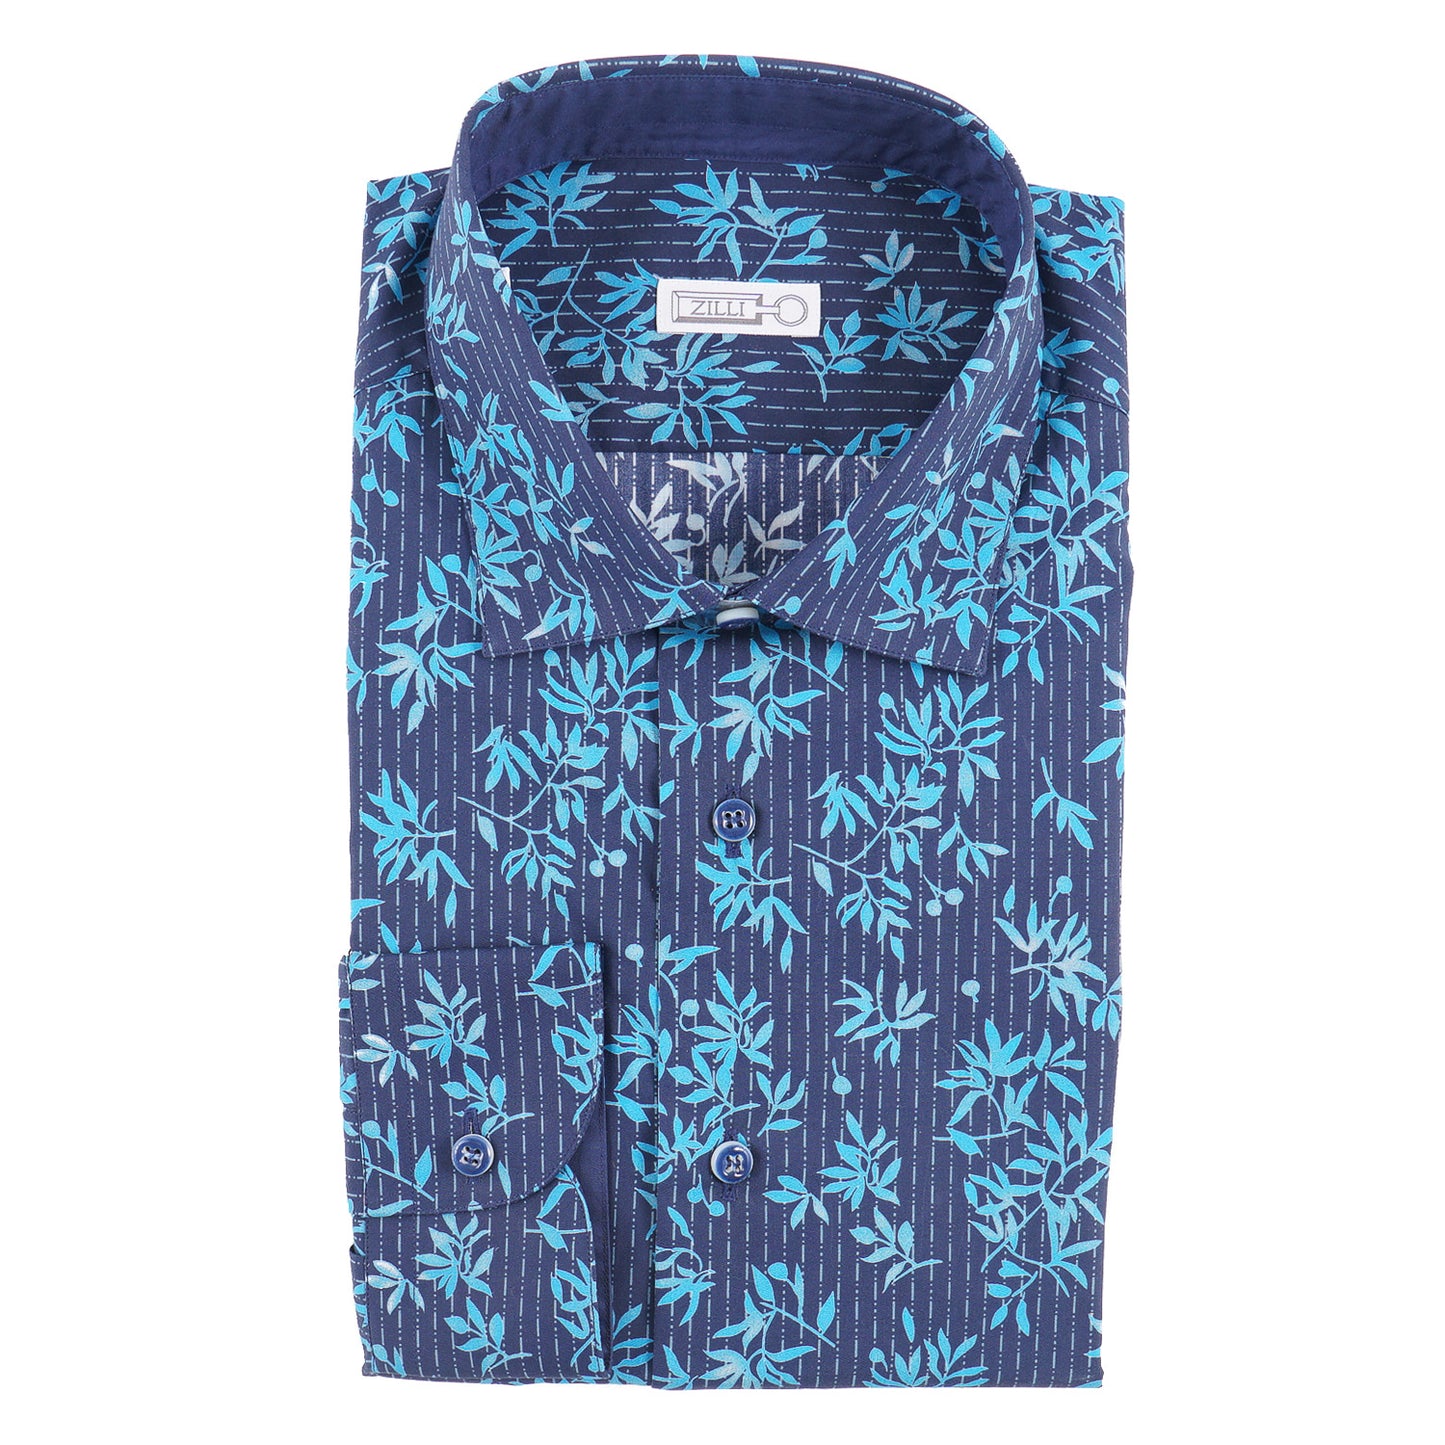 Zilli Tailored-Fit Shirt with Floral Print - Top Shelf Apparel